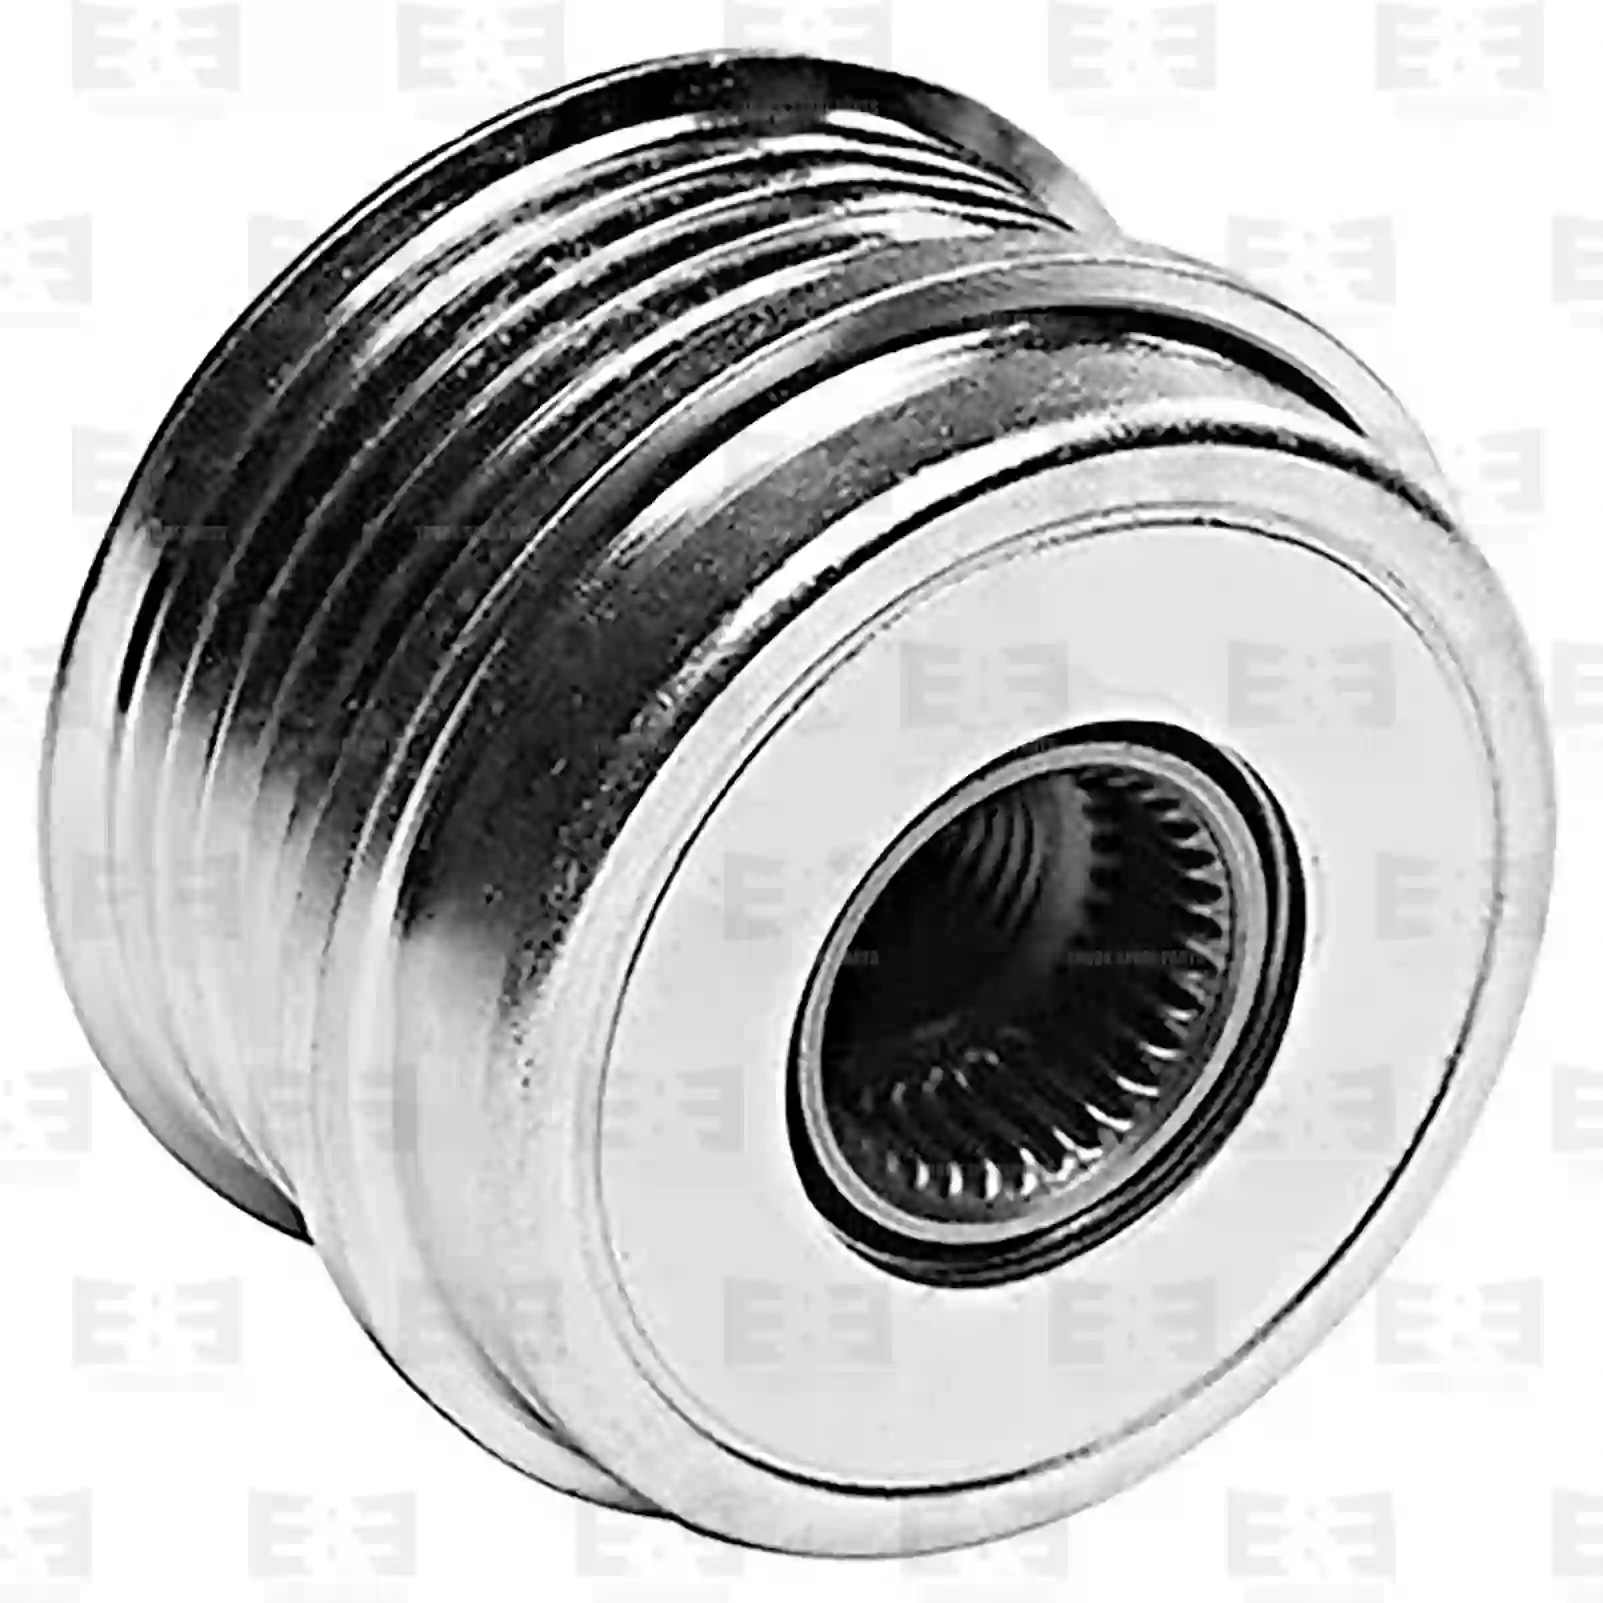 Pulley, alternator, 2E2299489, 09949580, 038903119L, 071903119B, 071903165, 09949580, 9949580, GD215541, 09949580, 23150-2W200, 038903119L, 071903119B, 071903165, 038903119L, 071903119B, 071903165, 038903119B, 038903119L, 071903119B, 071903165 ||  2E2299489 E&E Truck Spare Parts | Truck Spare Parts, Auotomotive Spare Parts Pulley, alternator, 2E2299489, 09949580, 038903119L, 071903119B, 071903165, 09949580, 9949580, GD215541, 09949580, 23150-2W200, 038903119L, 071903119B, 071903165, 038903119L, 071903119B, 071903165, 038903119B, 038903119L, 071903119B, 071903165 ||  2E2299489 E&E Truck Spare Parts | Truck Spare Parts, Auotomotive Spare Parts